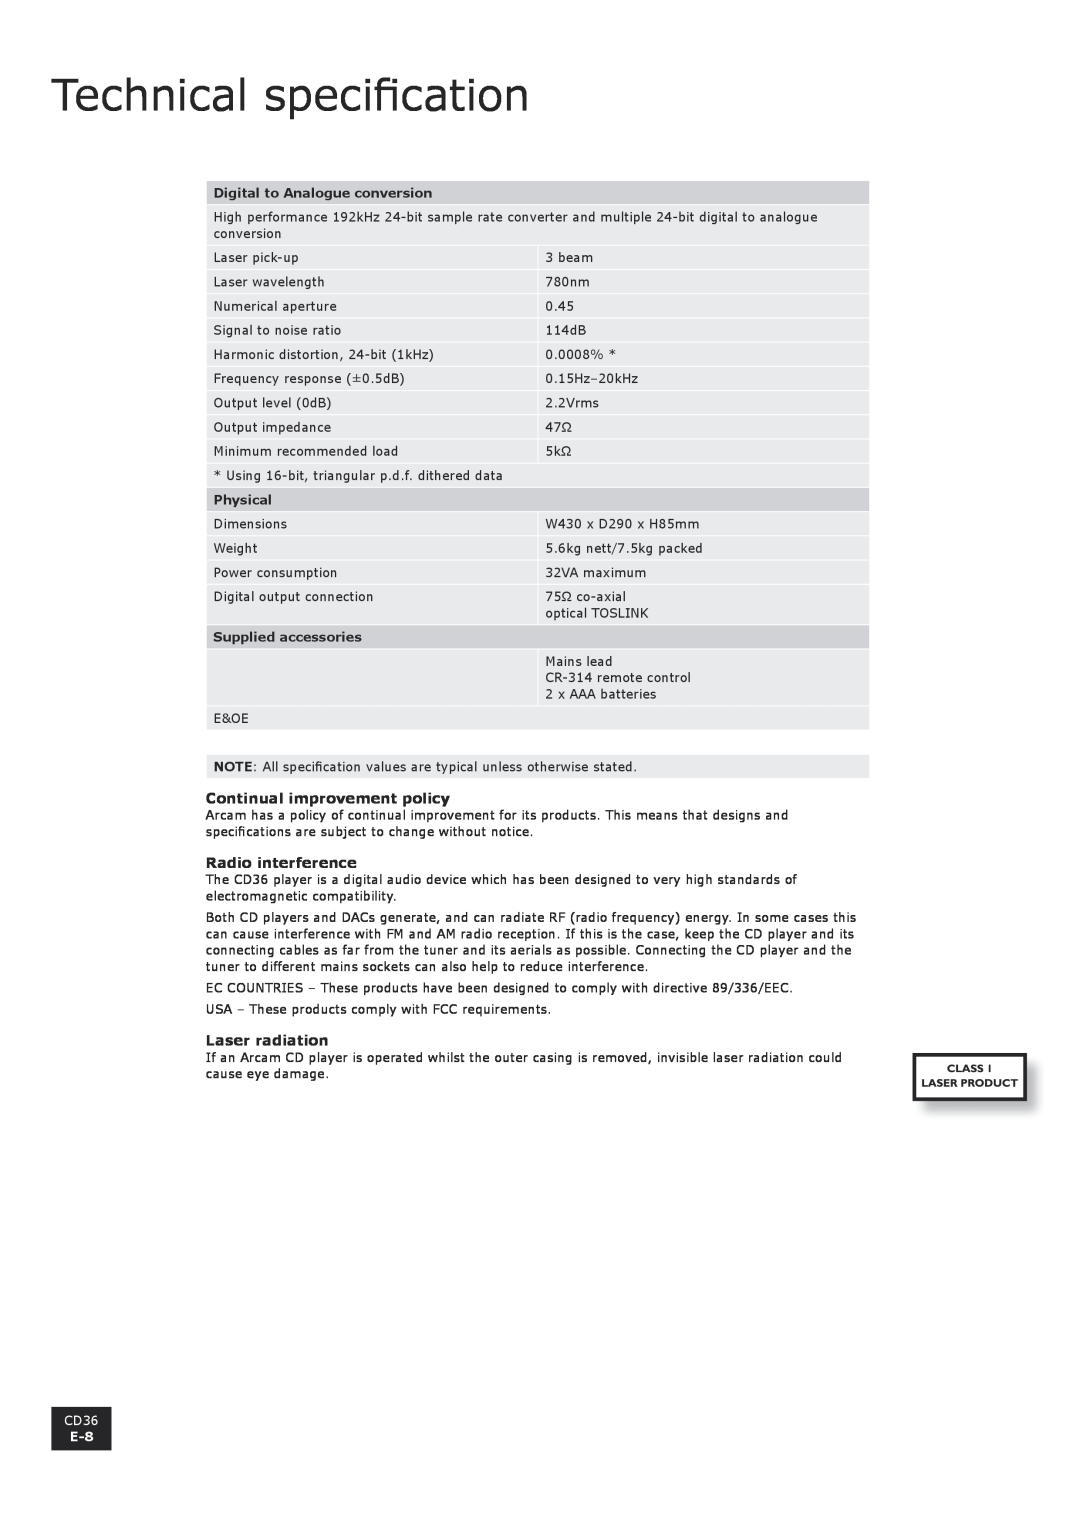 Arcam CD36 manual Technical specification, Continual improvement policy, Radio interference, Laser radiation 